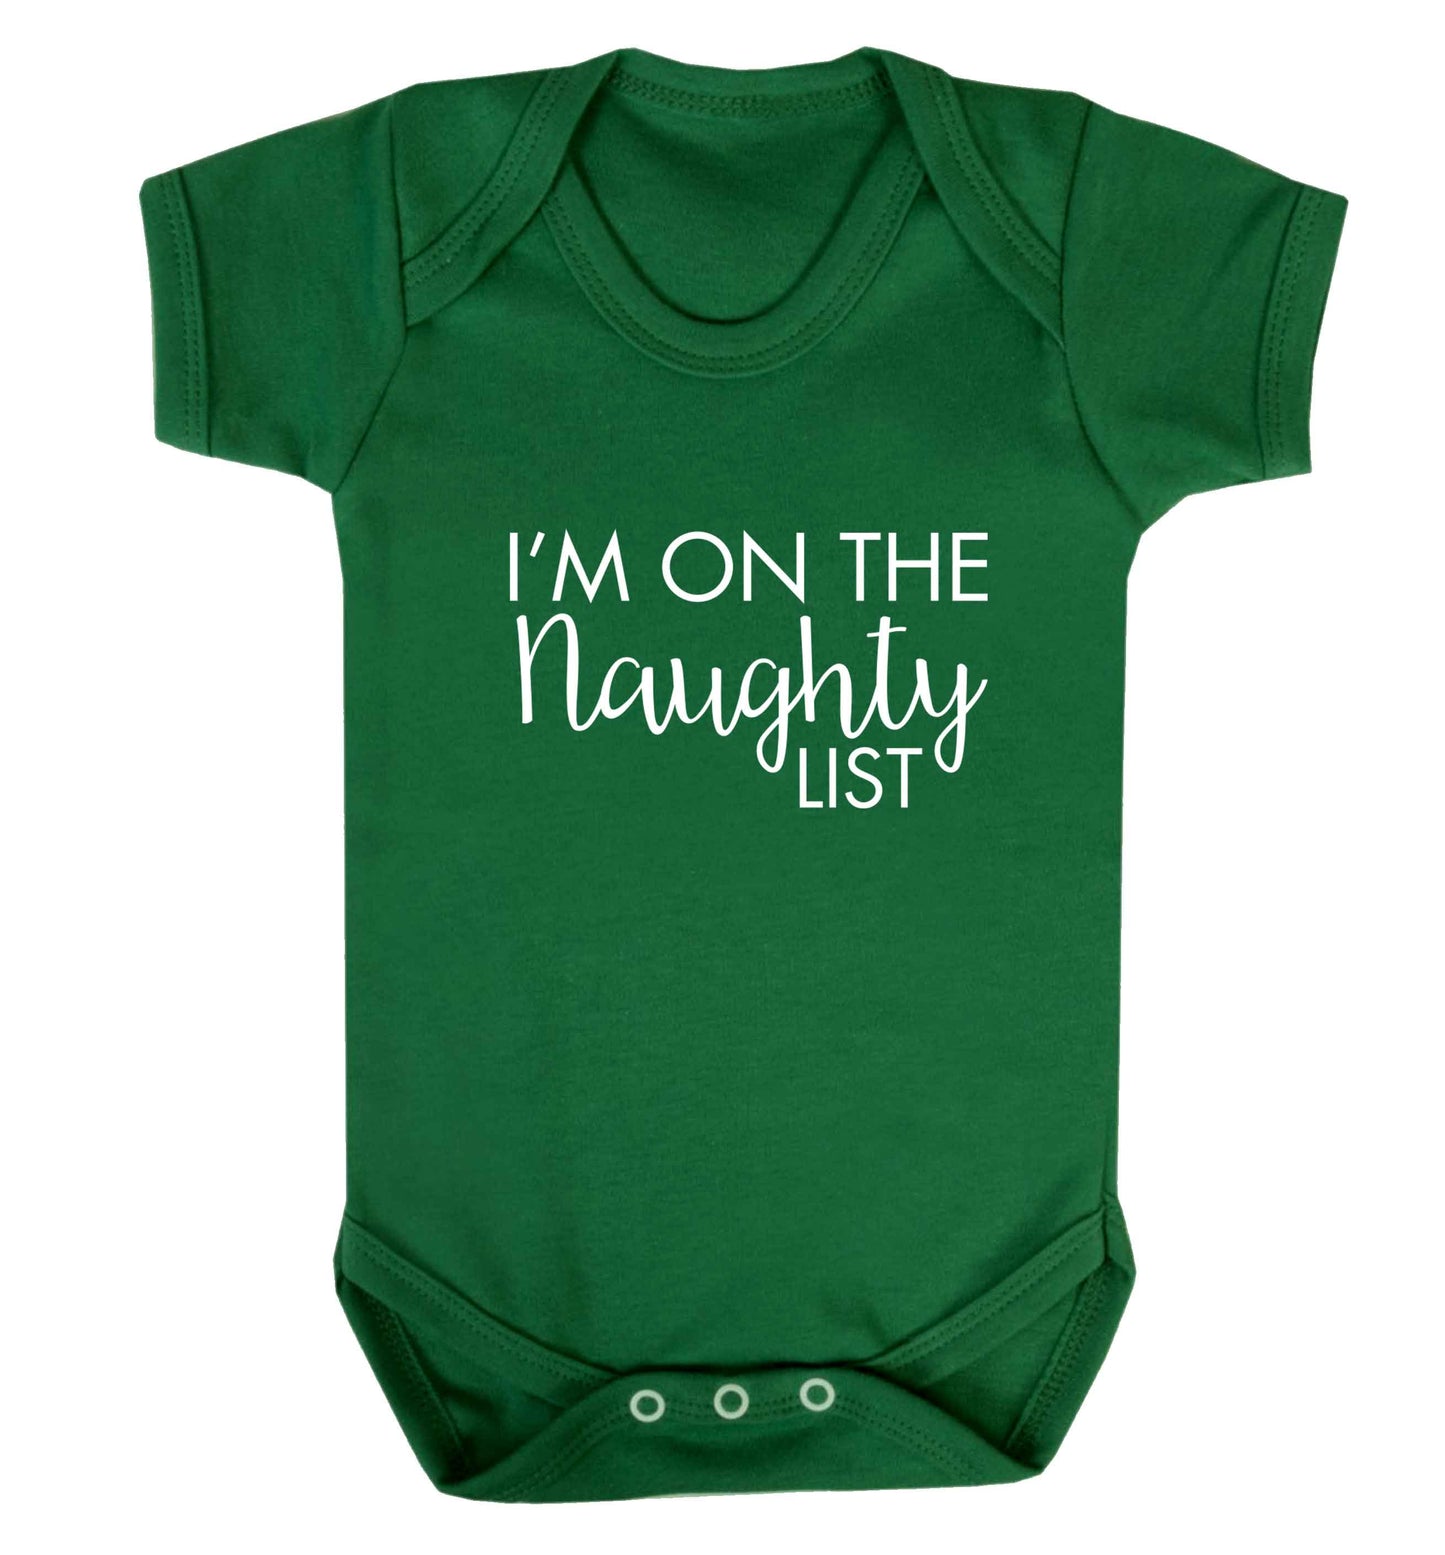 I'm on the naughty list baby vest green 18-24 months